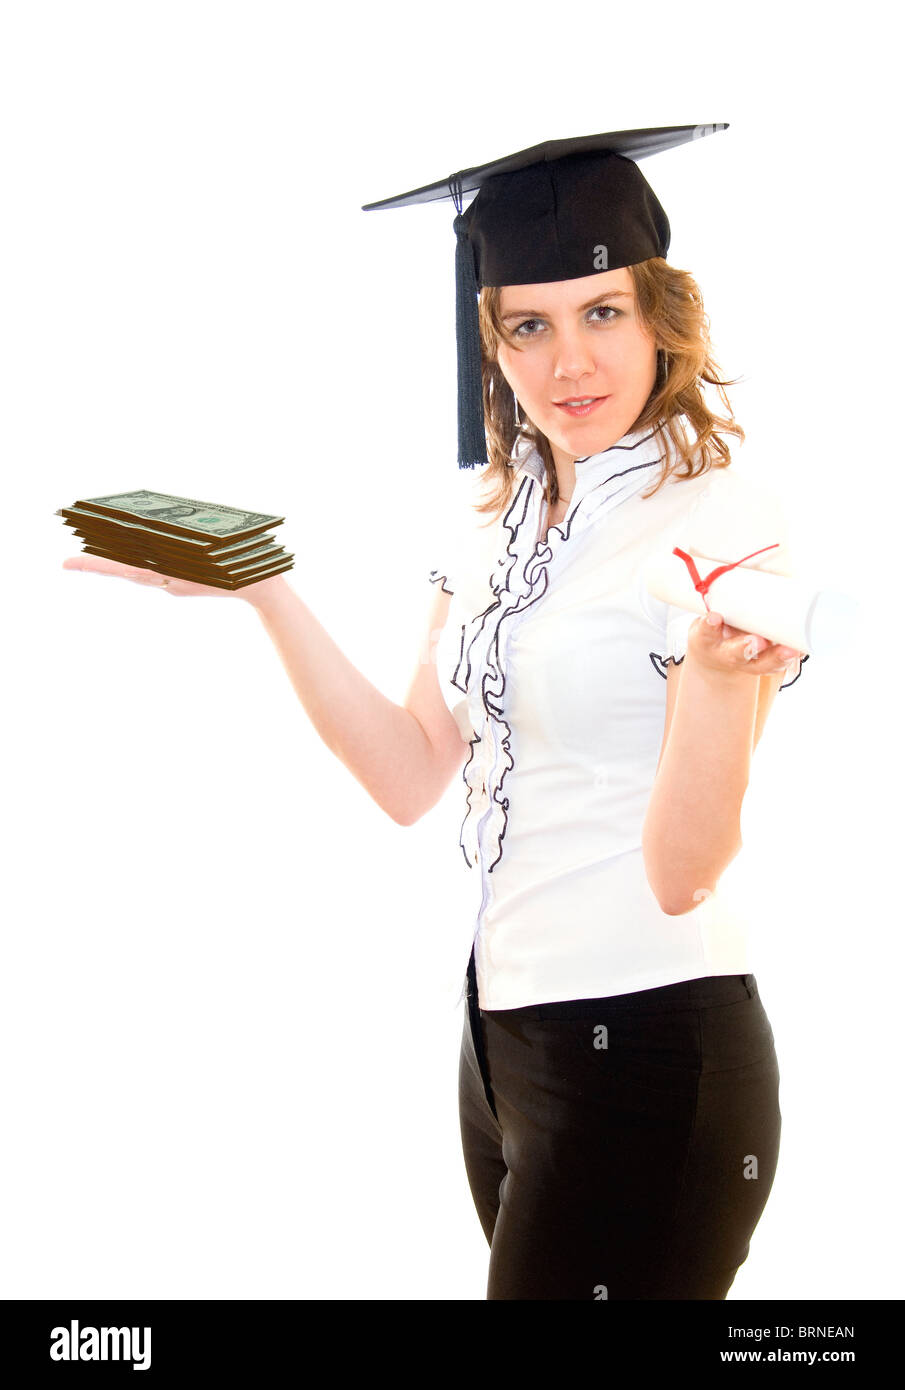 Young woman with graduation diploma in one hand, a lot of money in other hand, and graduation hat on her head, isolated on white Stock Photo